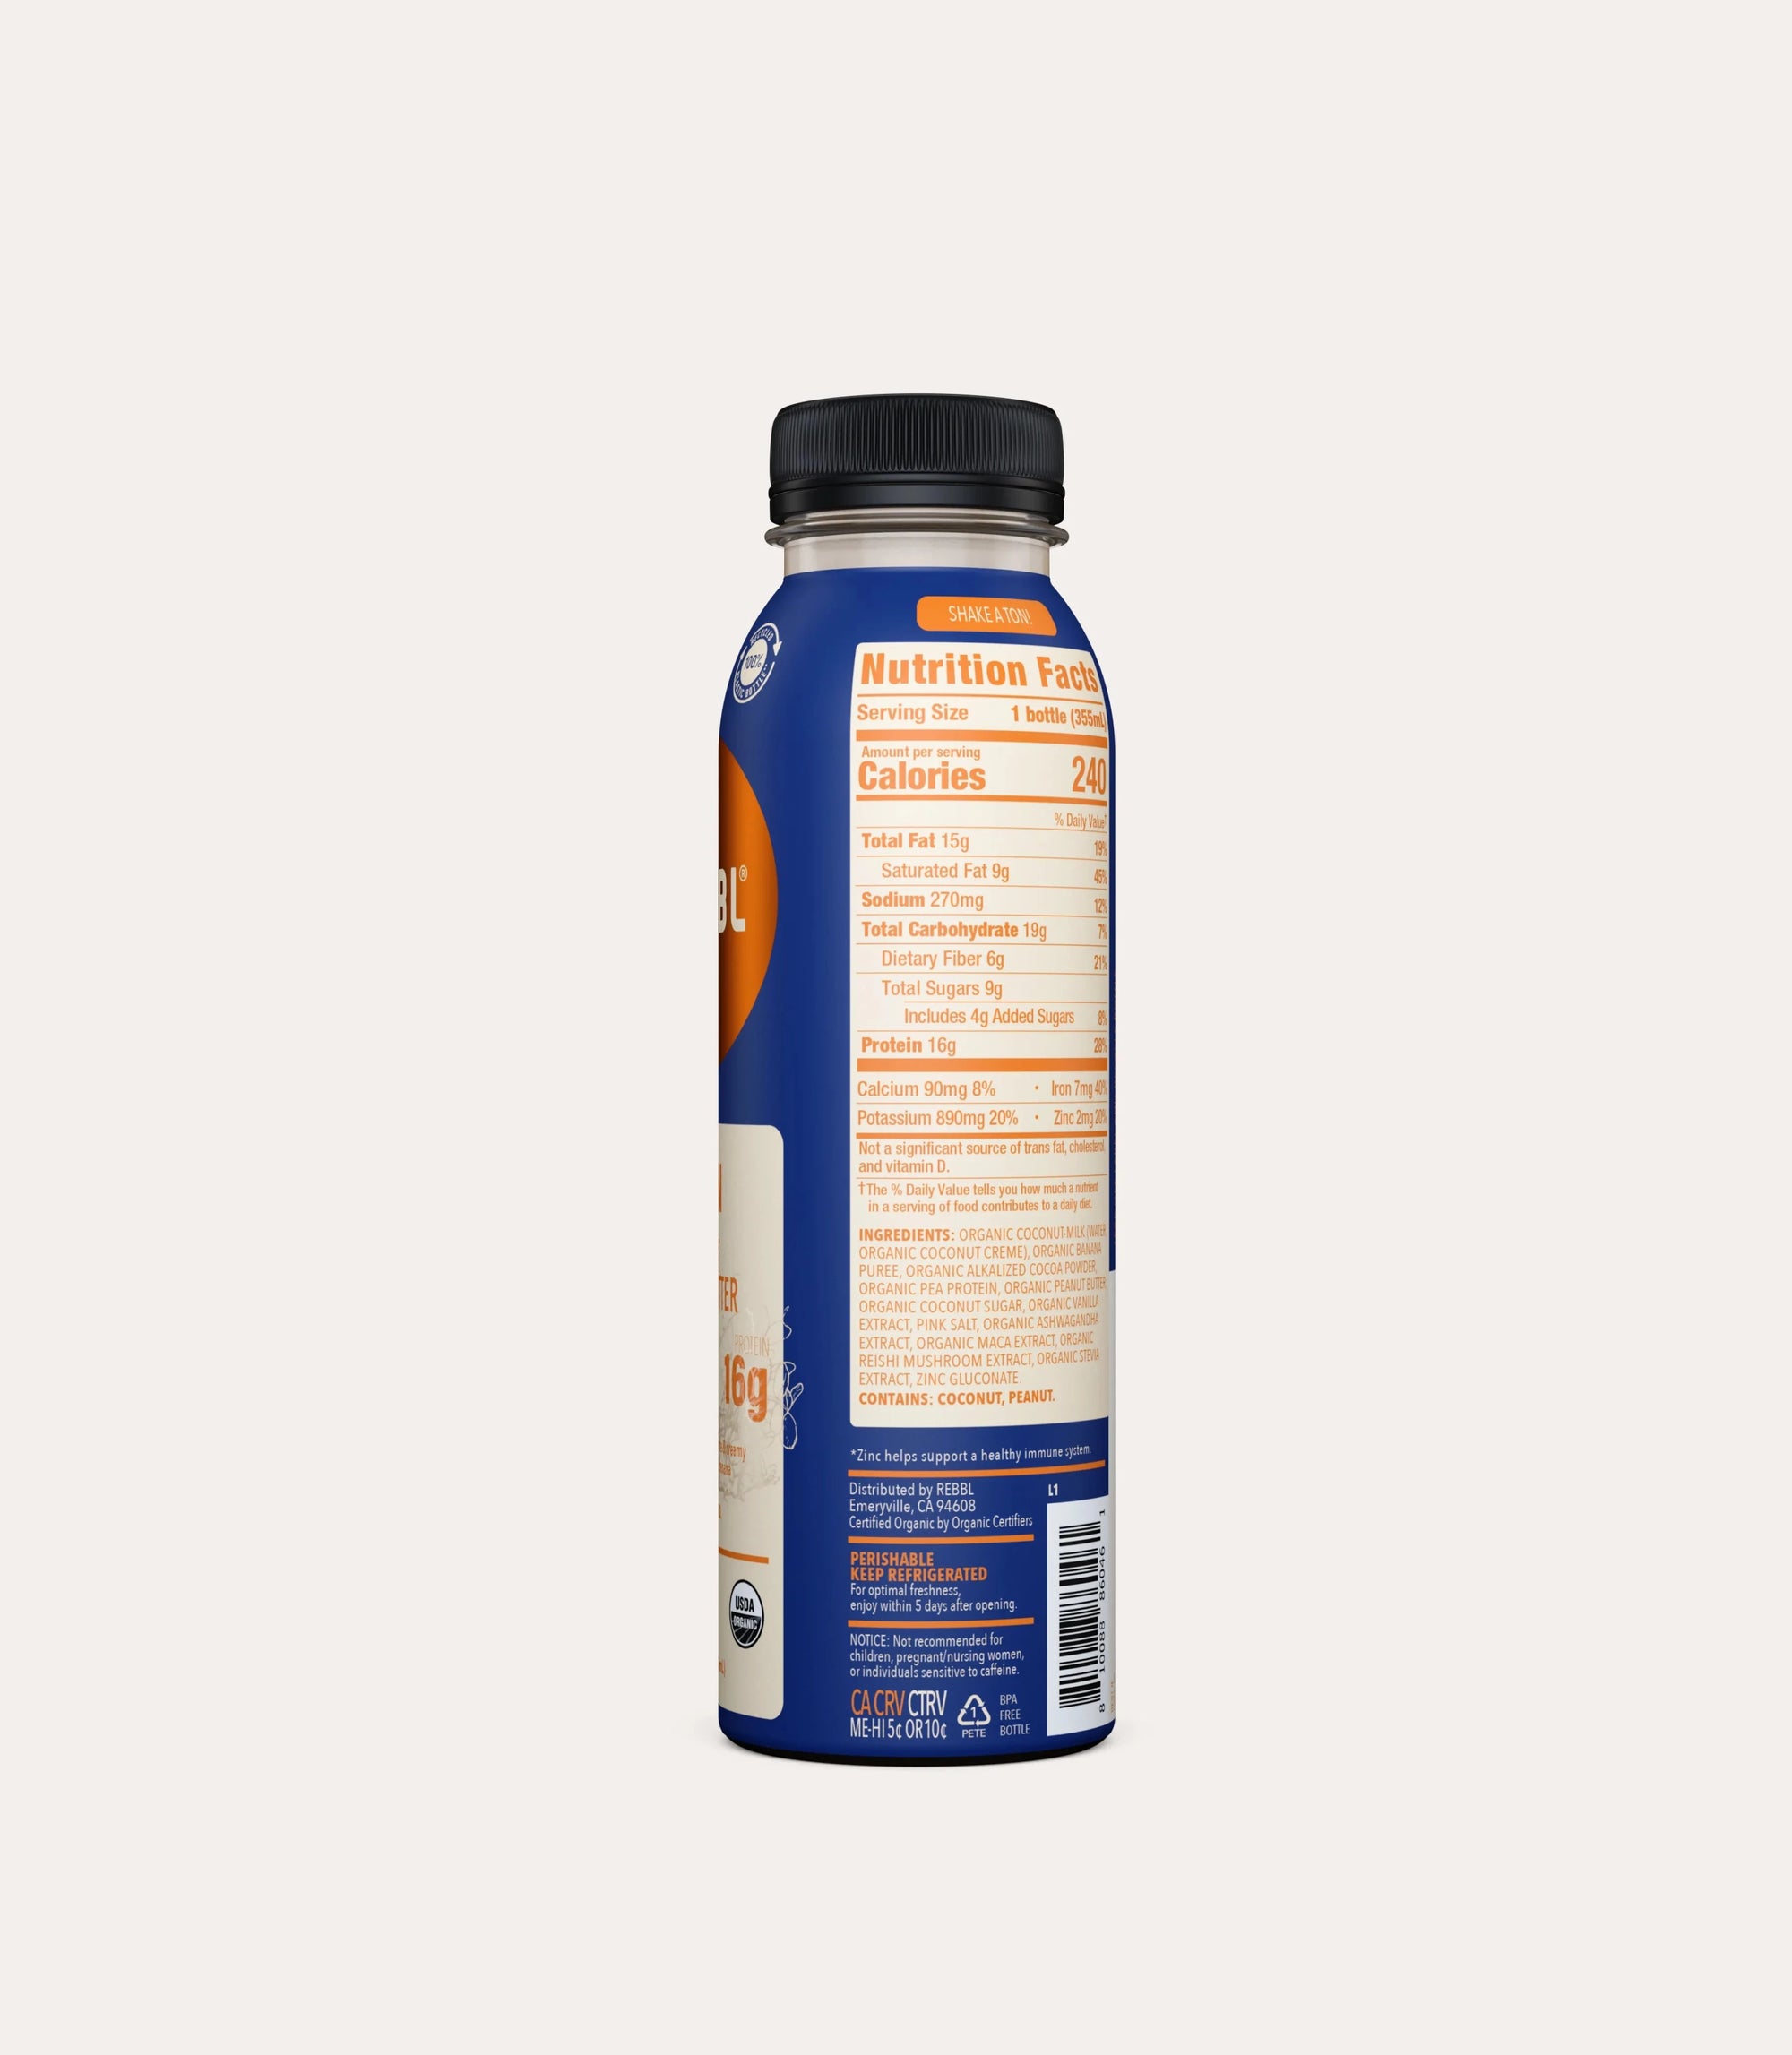 Protein bottle with Nutrition facts